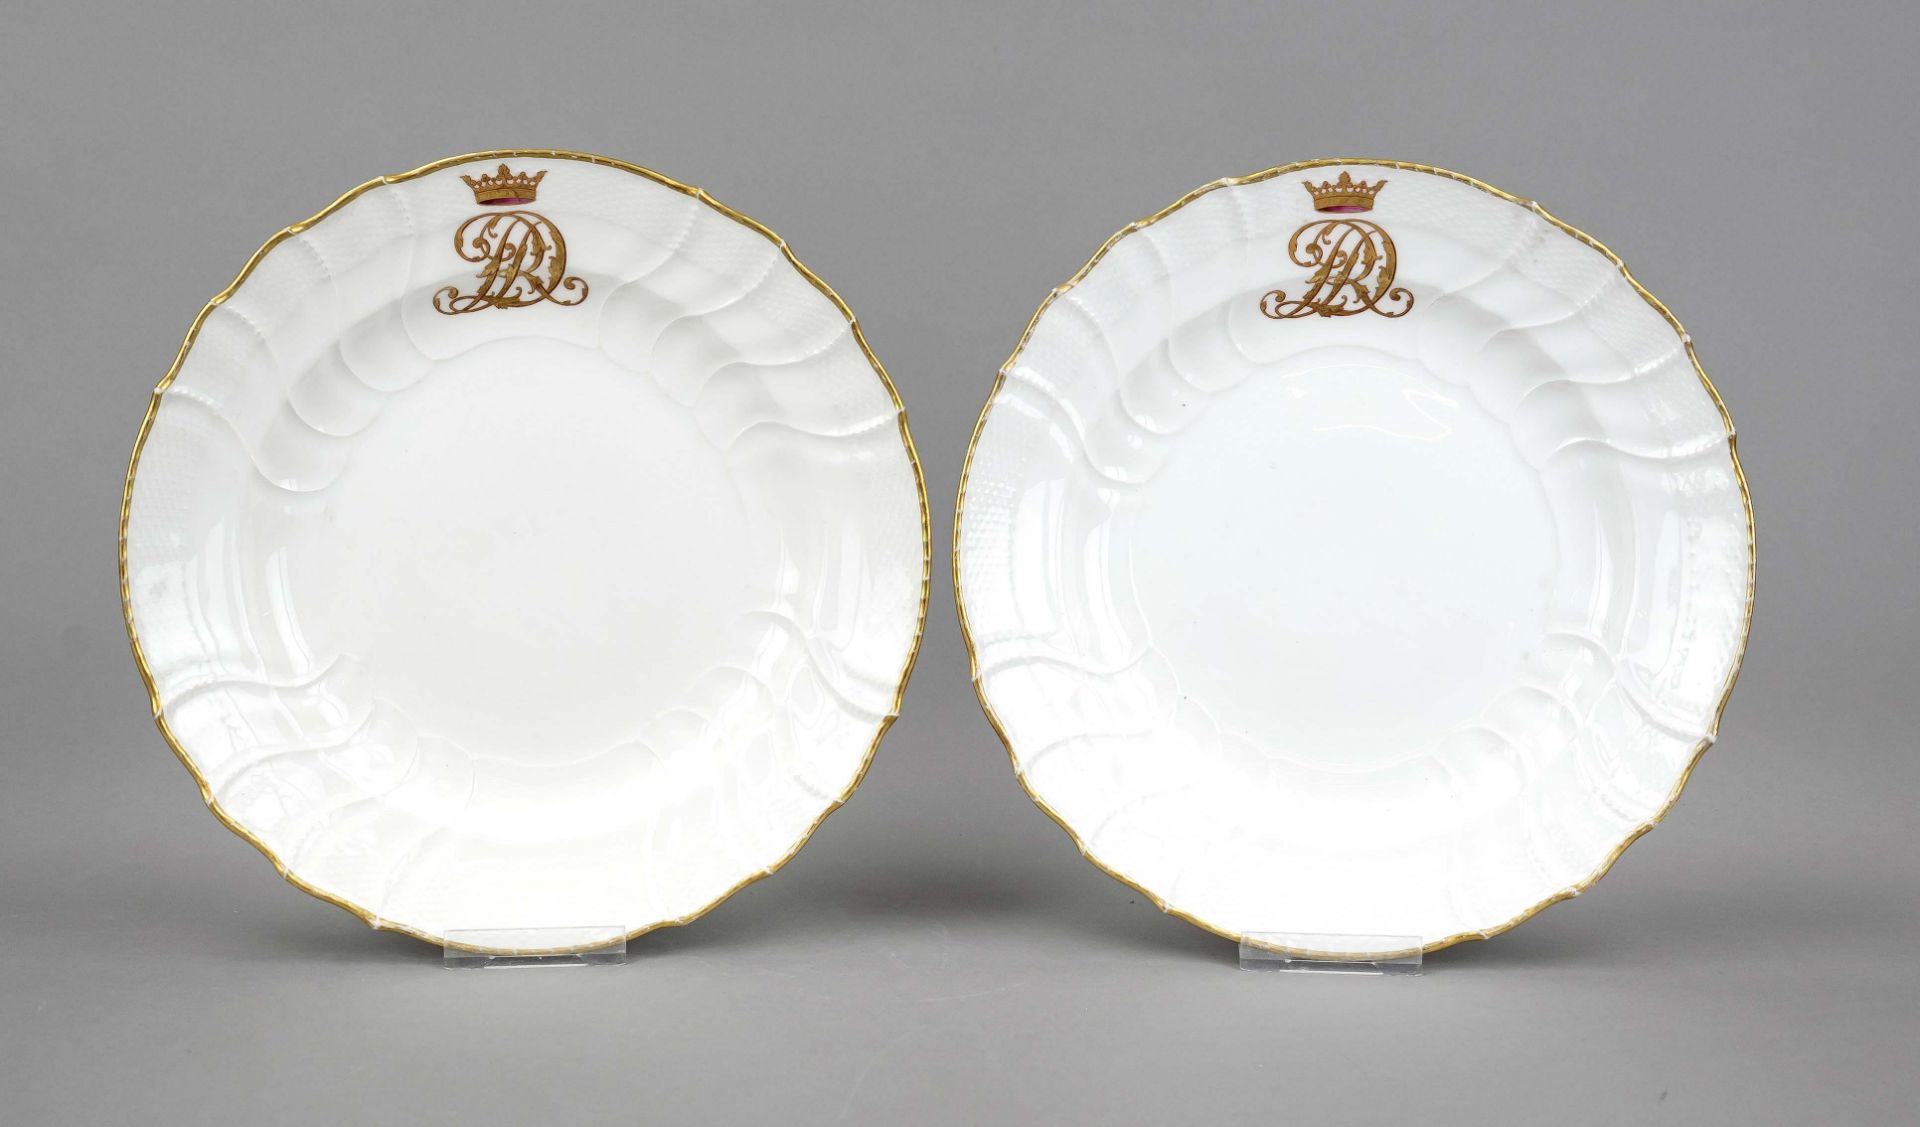 Two dinner plates owned by nobility, KPM Berlin, pre-1945 mark, red imperial orb mark, Neuozier